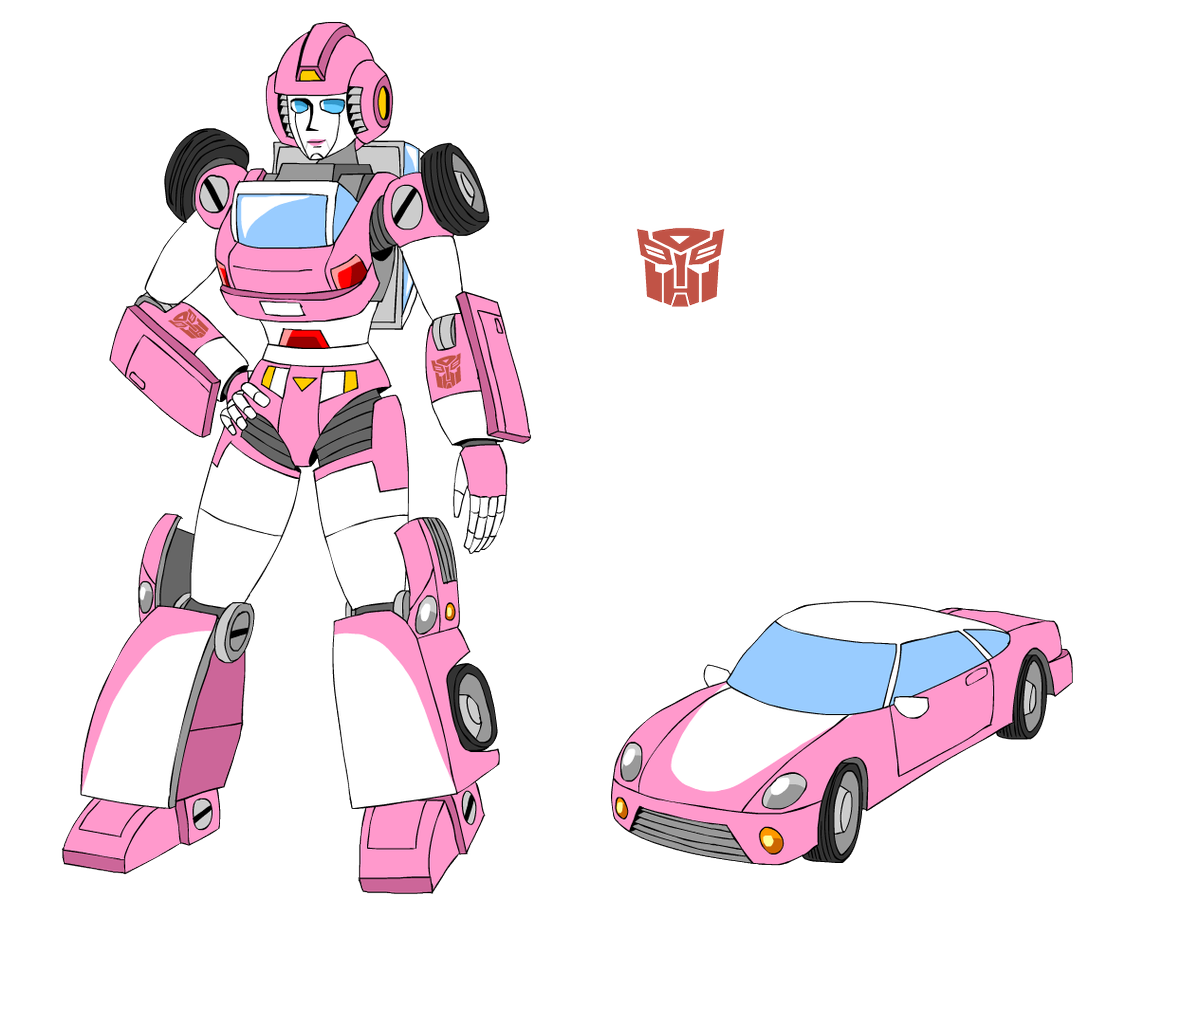 144. and I thought this would be a good time to post the Arcee designs I&ap...